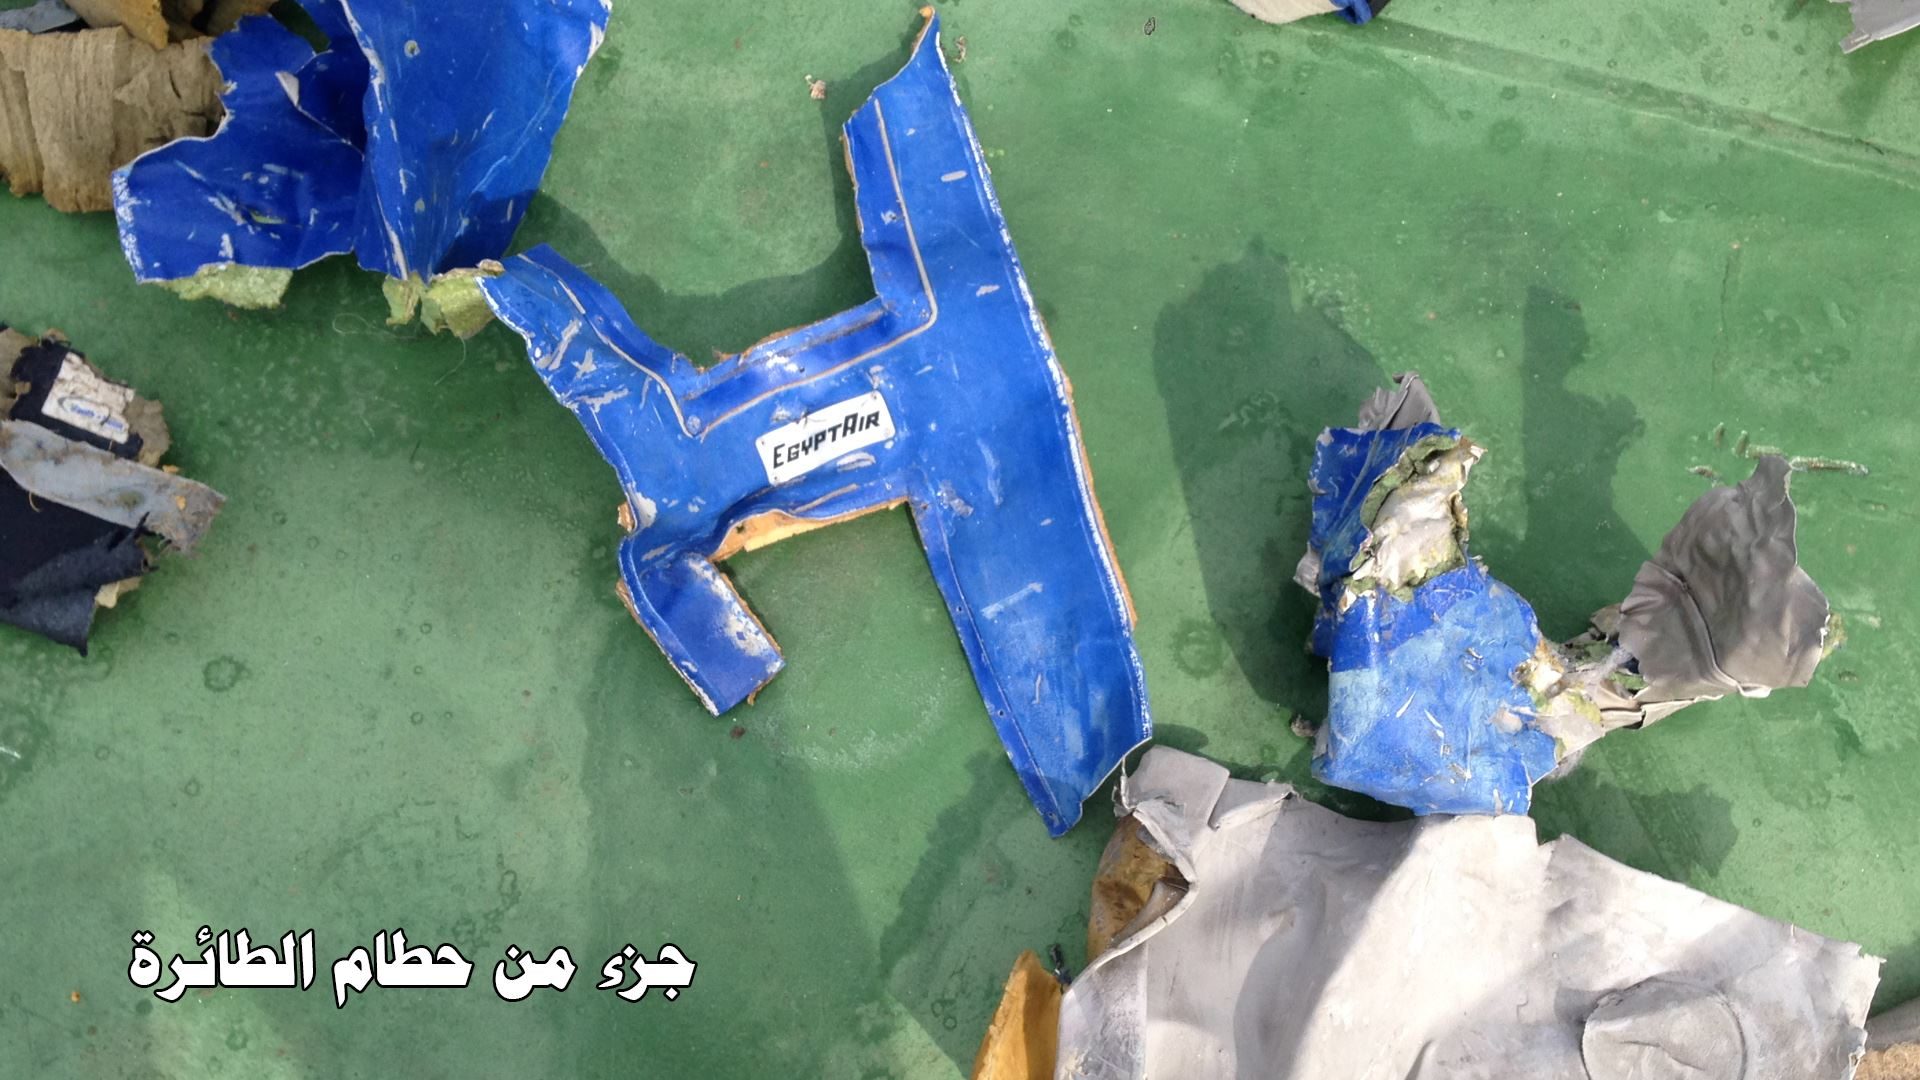 Search on for clues in EgyptAir MS804 crash